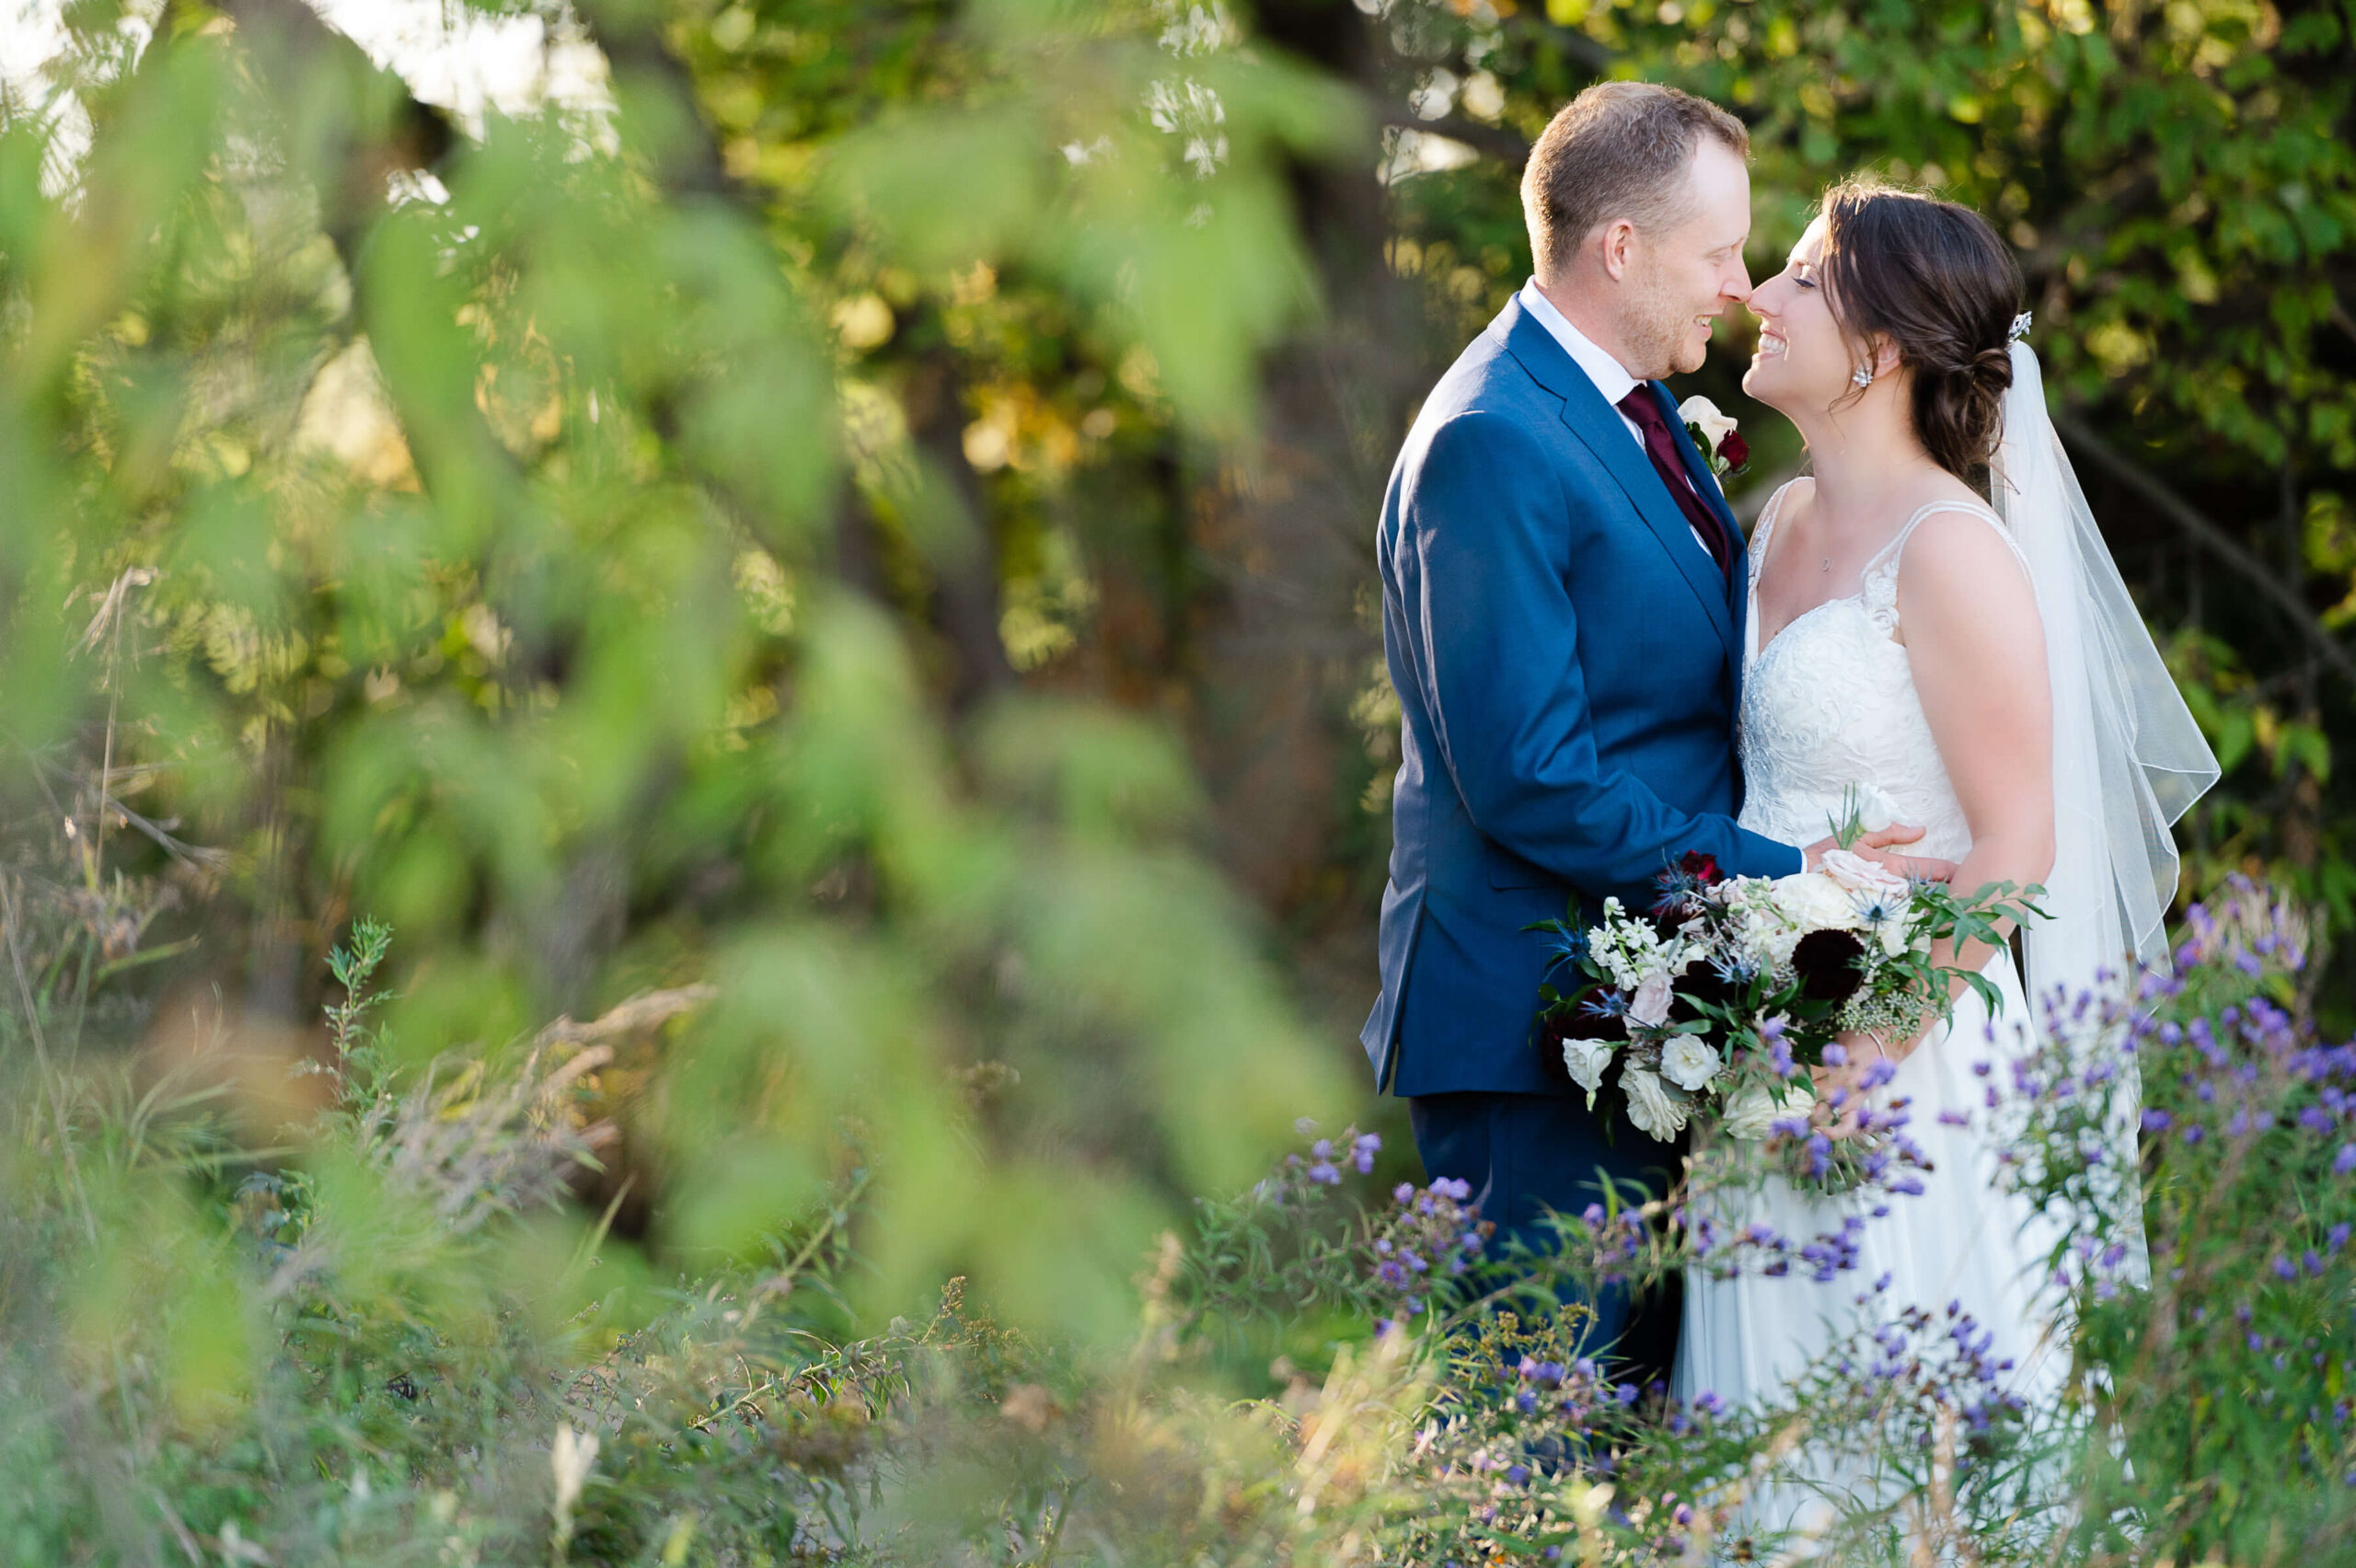 a bride in a white dress and a groom in a blue suit nuzzle noses during a wedding organized by Opportunity Knocks Events